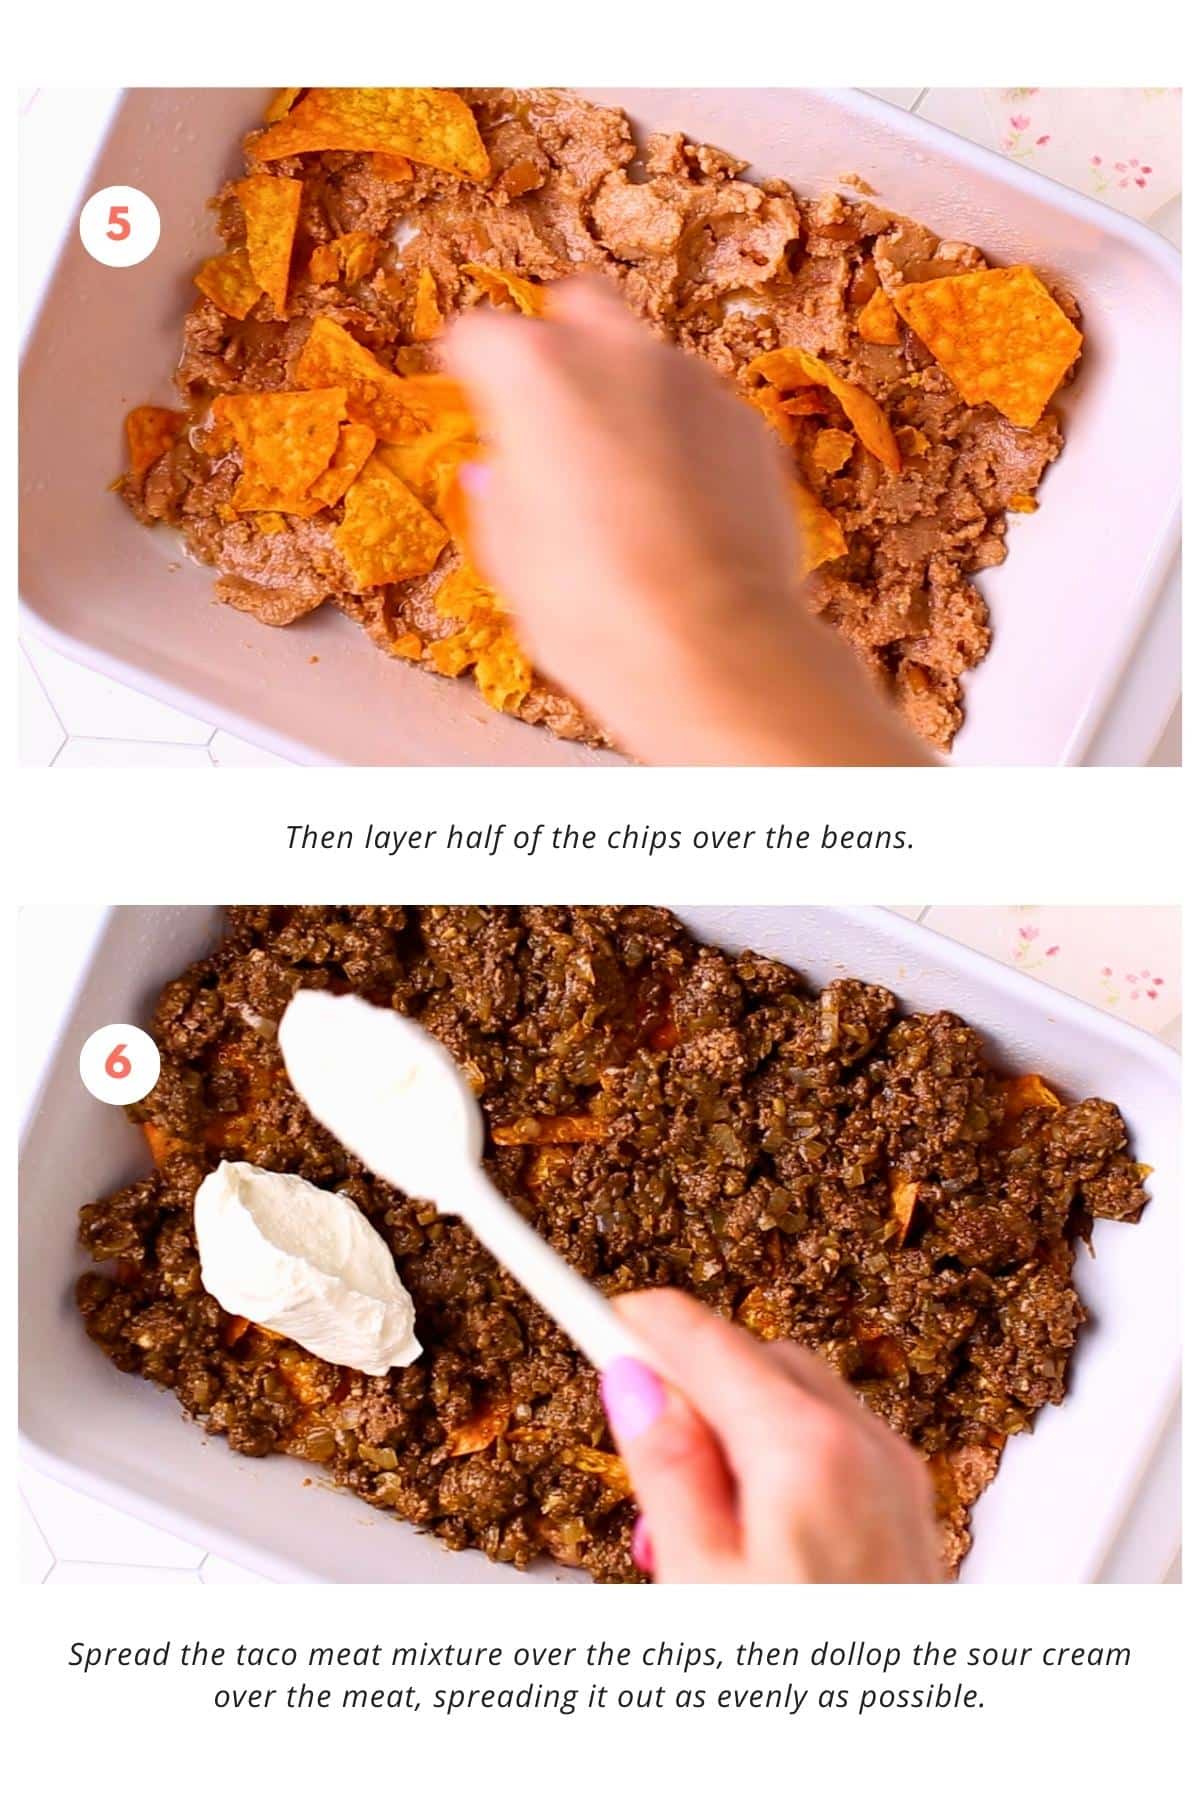 Add a layer of half of the chips is placed over the beans. The taco meat mixture is spread over the chips, and the sour cream is dolloped over the meat, evenly spreading it out.